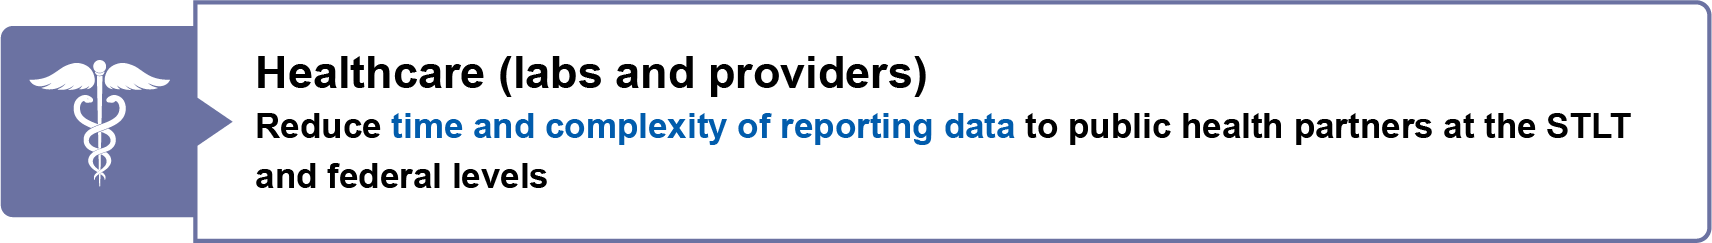 Healthcare (labs and providers): Reduce time and complexity of reporting data to public health partners (at the STLT- and federal-levels)